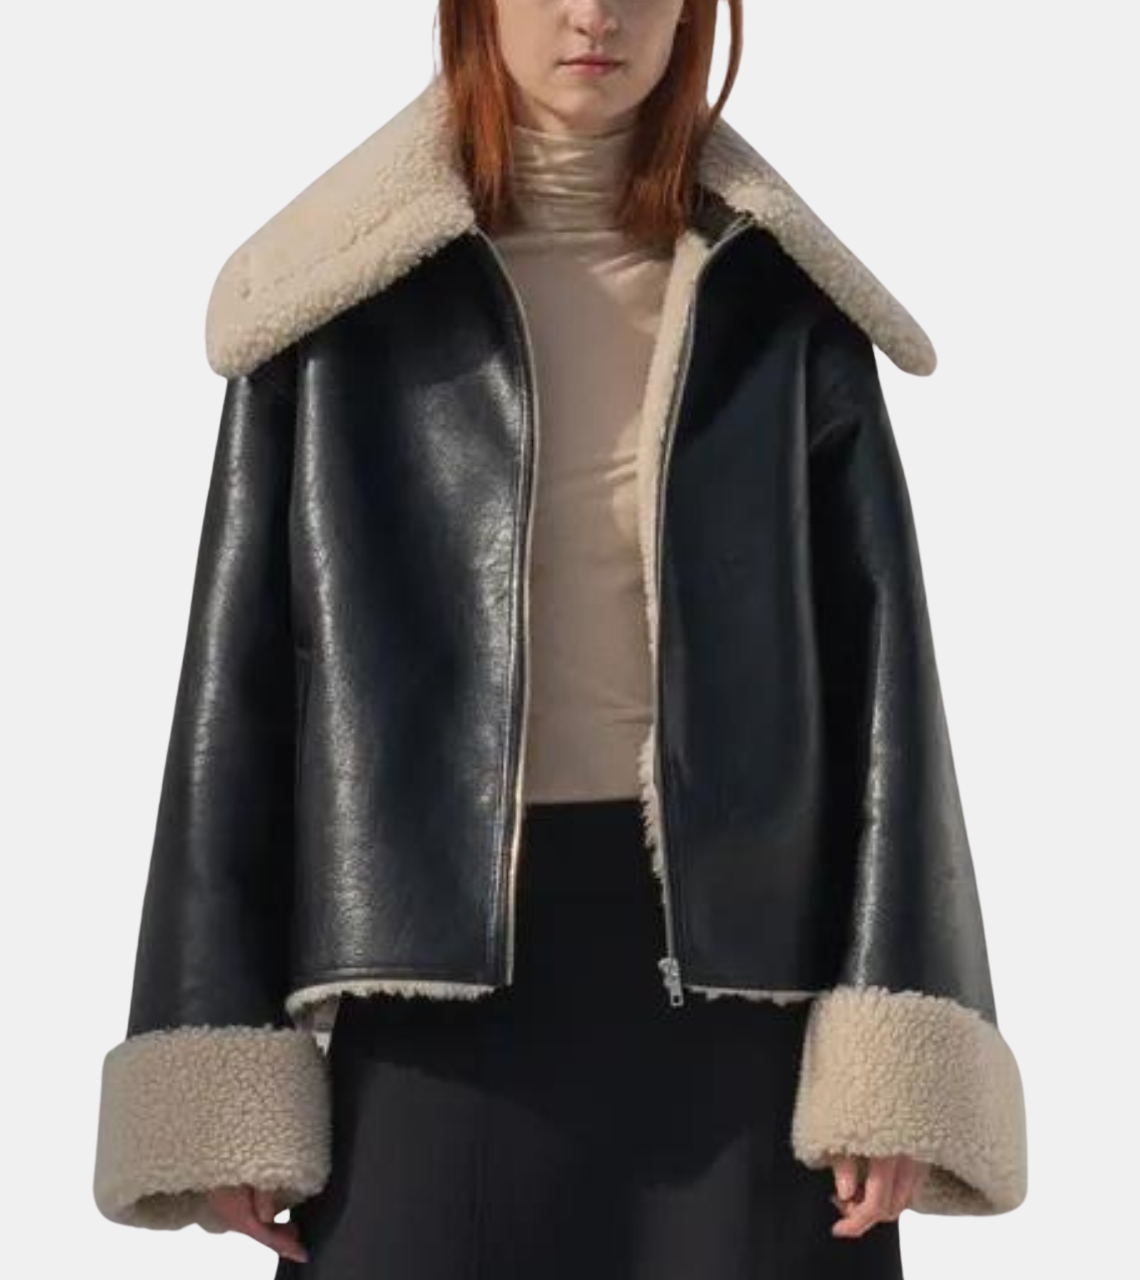  Reign Women's Shearling Collar Black Bomber Leather Jacket 